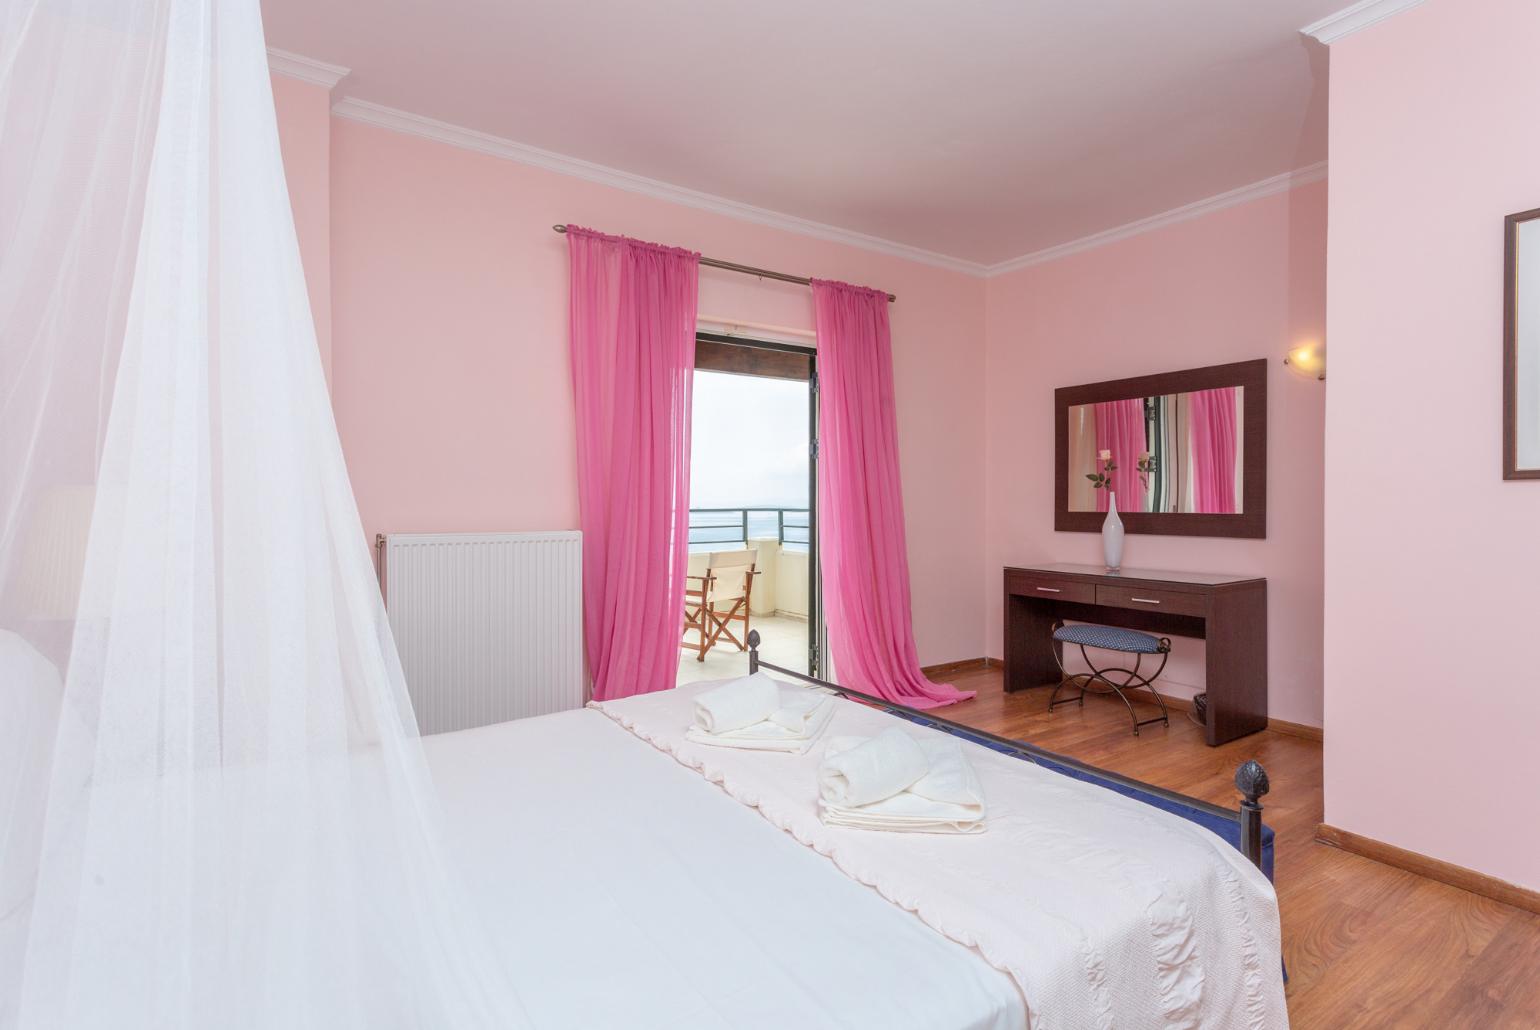 Double bedroom with en suite bathroom, A/C, and balcony access with panoramic sea views